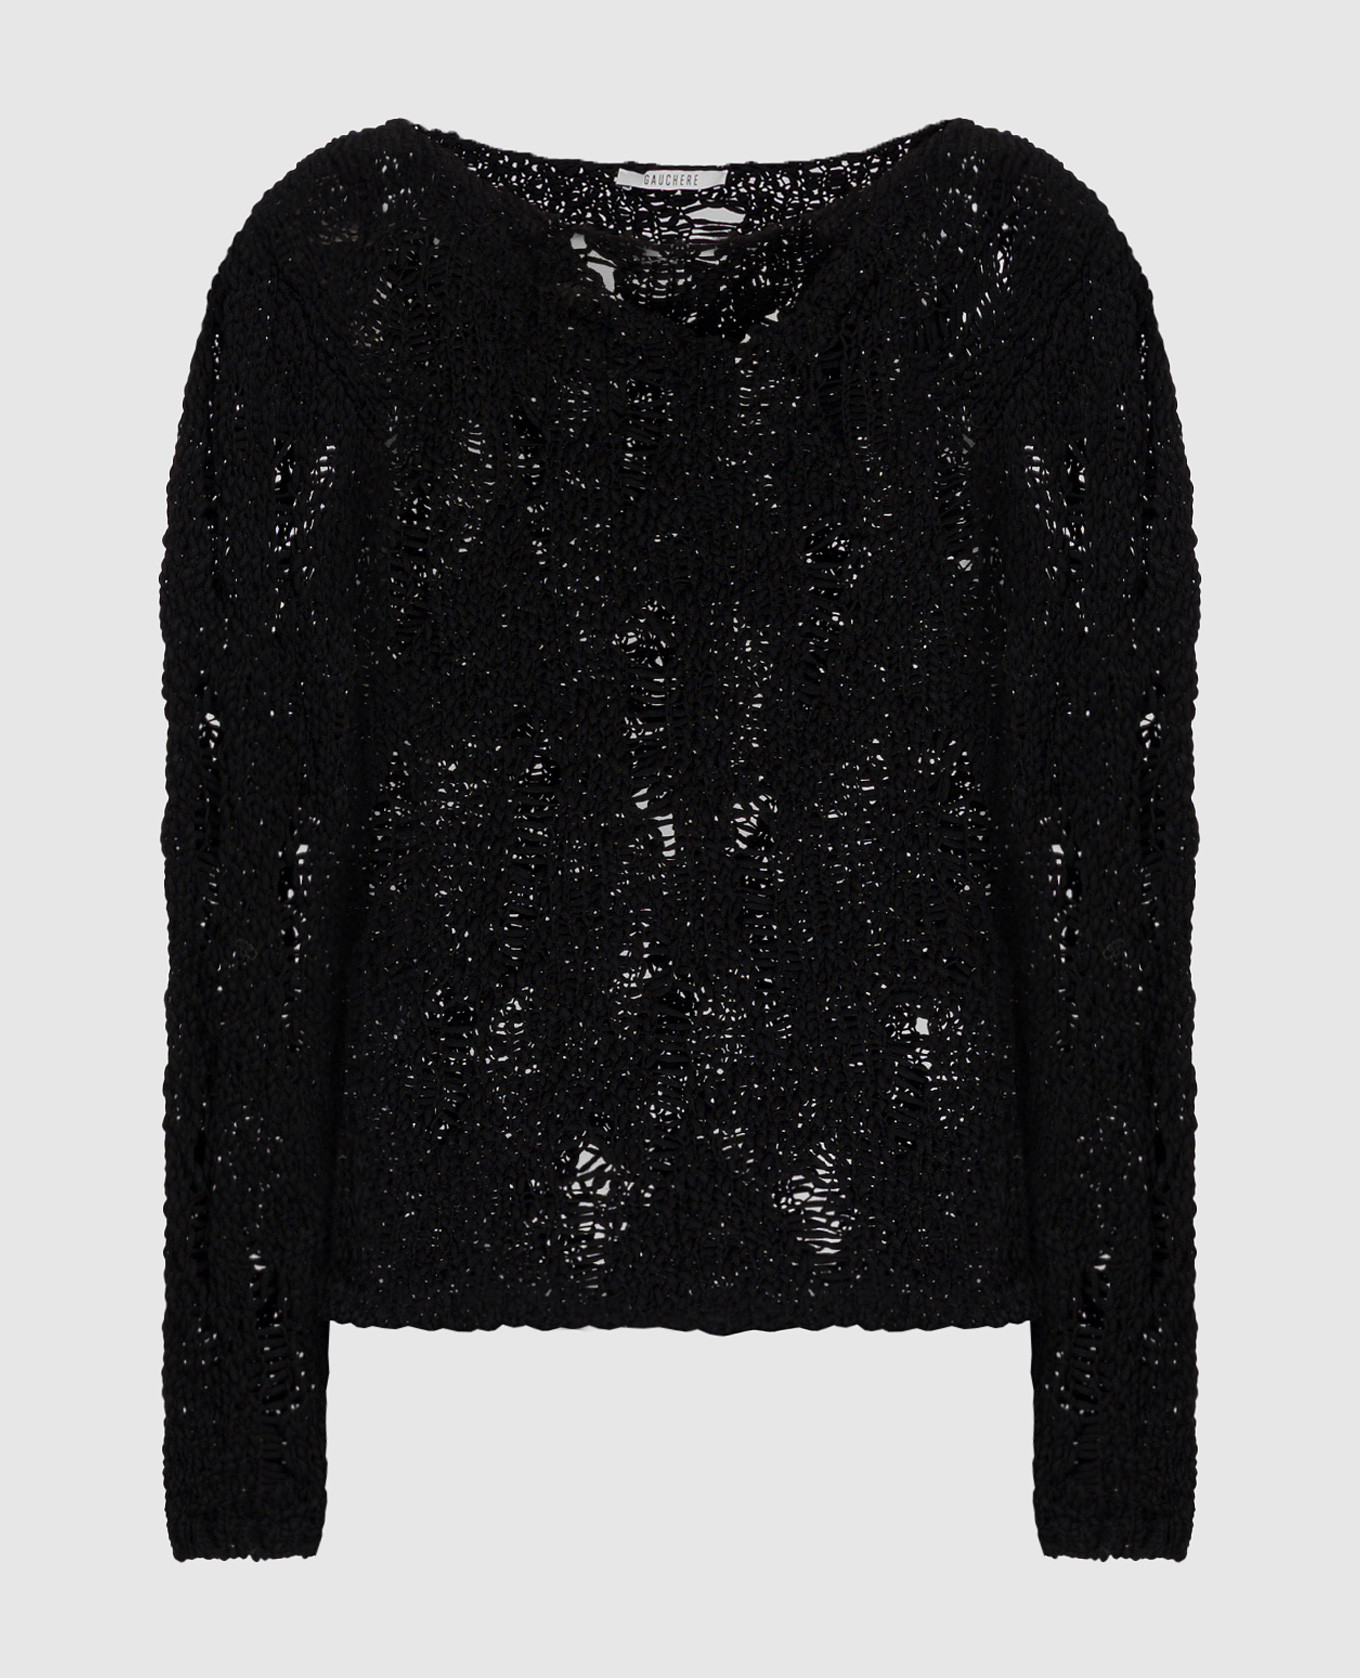 Black openwork sweater with holes